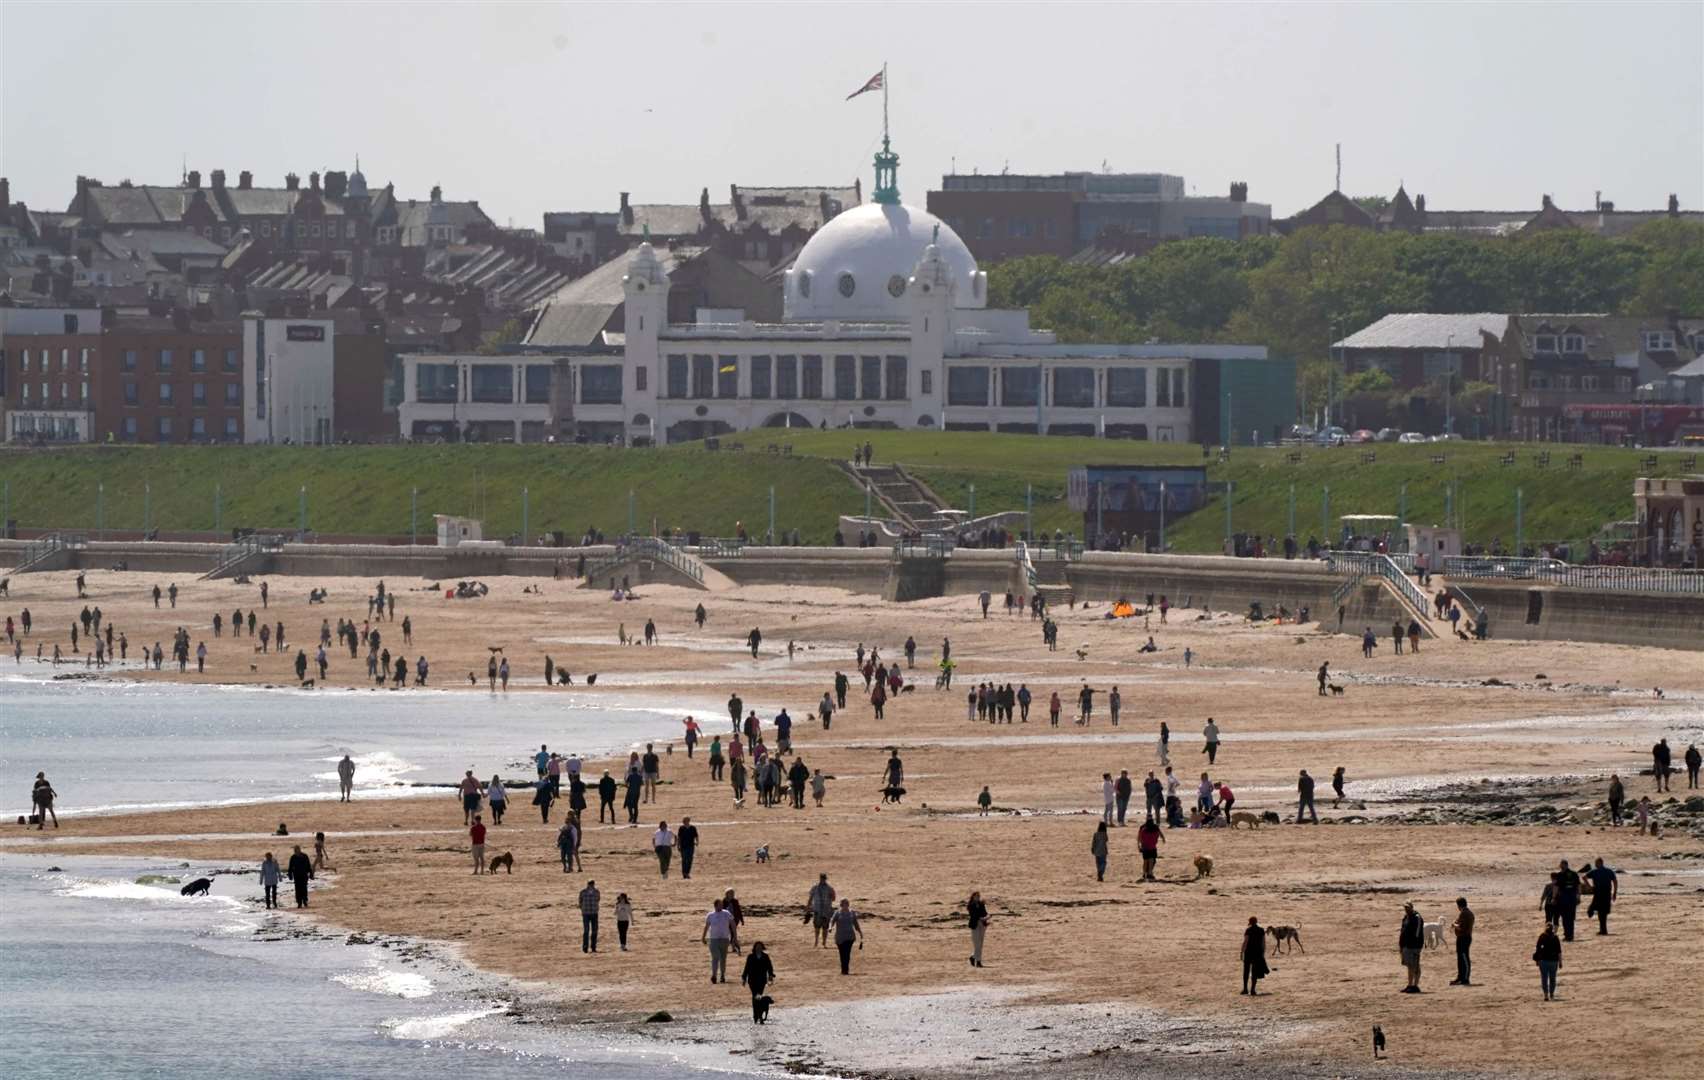 The sun was shining the length and breadth of Britain, and people enjoyed the weather on Whitley Bay beach on the north-east coast (Owen Humphreys/PA)